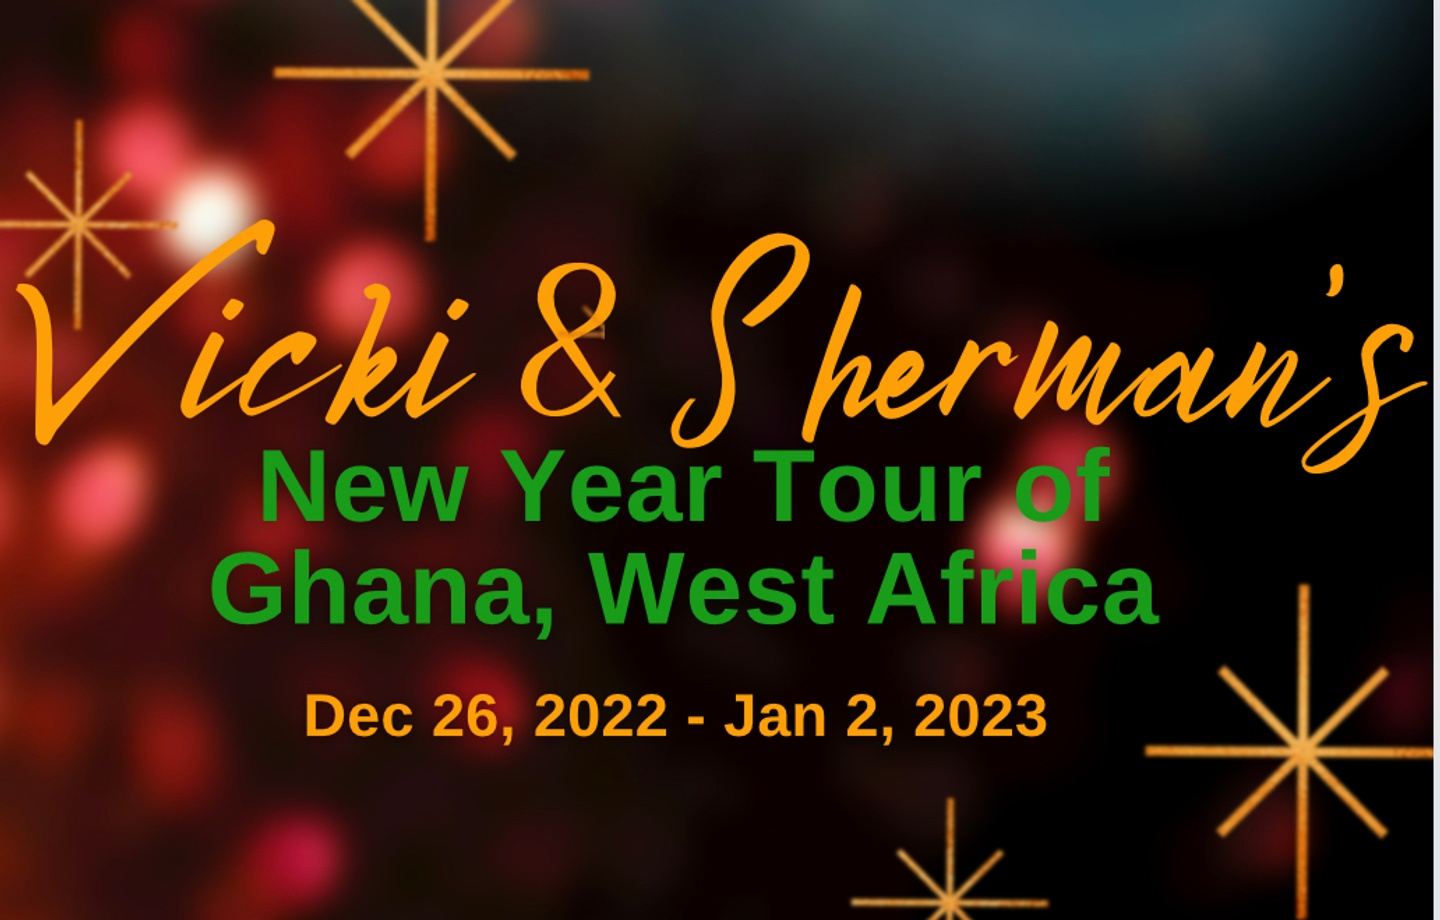 Vicky & Sherman’s New Year Tour of Ghana